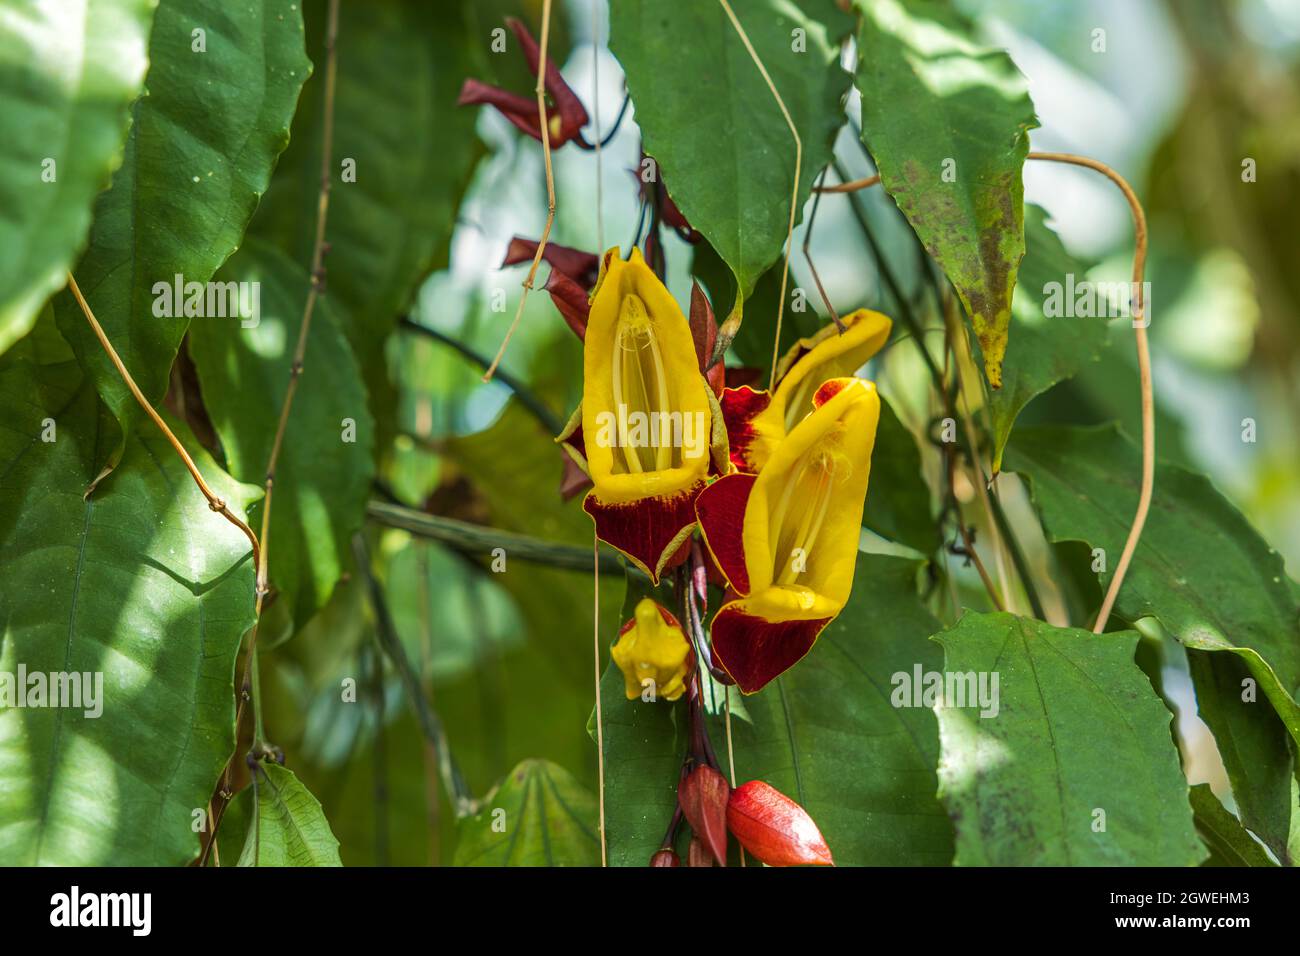 Close up view tropical flowers plants of Acanthaceae family woody-stemmed evergreen of Mysore trumpetvine or lady's shoe vine. Sweden. Stock Photo